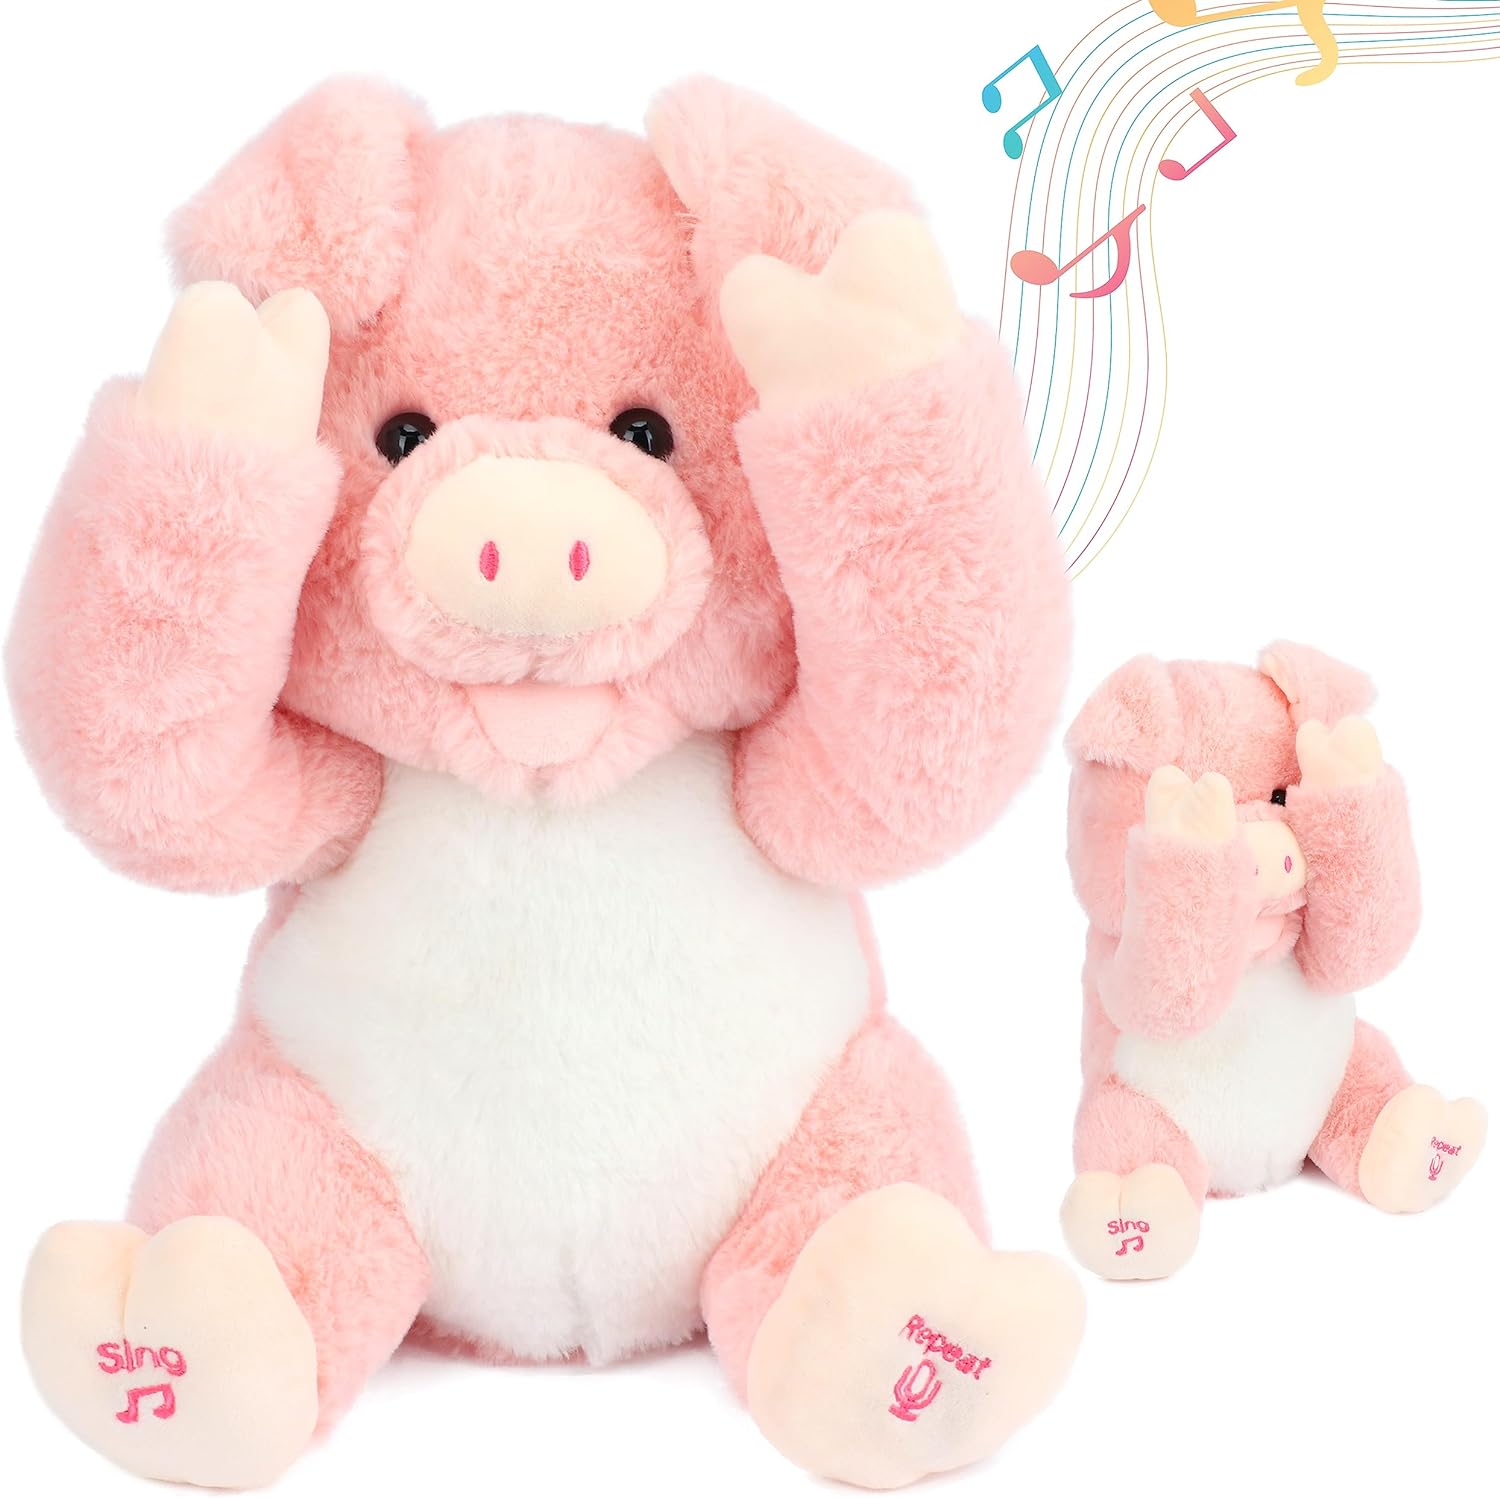 Cuteoy Peek A Boo Pig Interactive Repeats What You Say Plush Toy Musical Singing Talking Stuffed Animal Adorable Electric Animate Gifts 11''